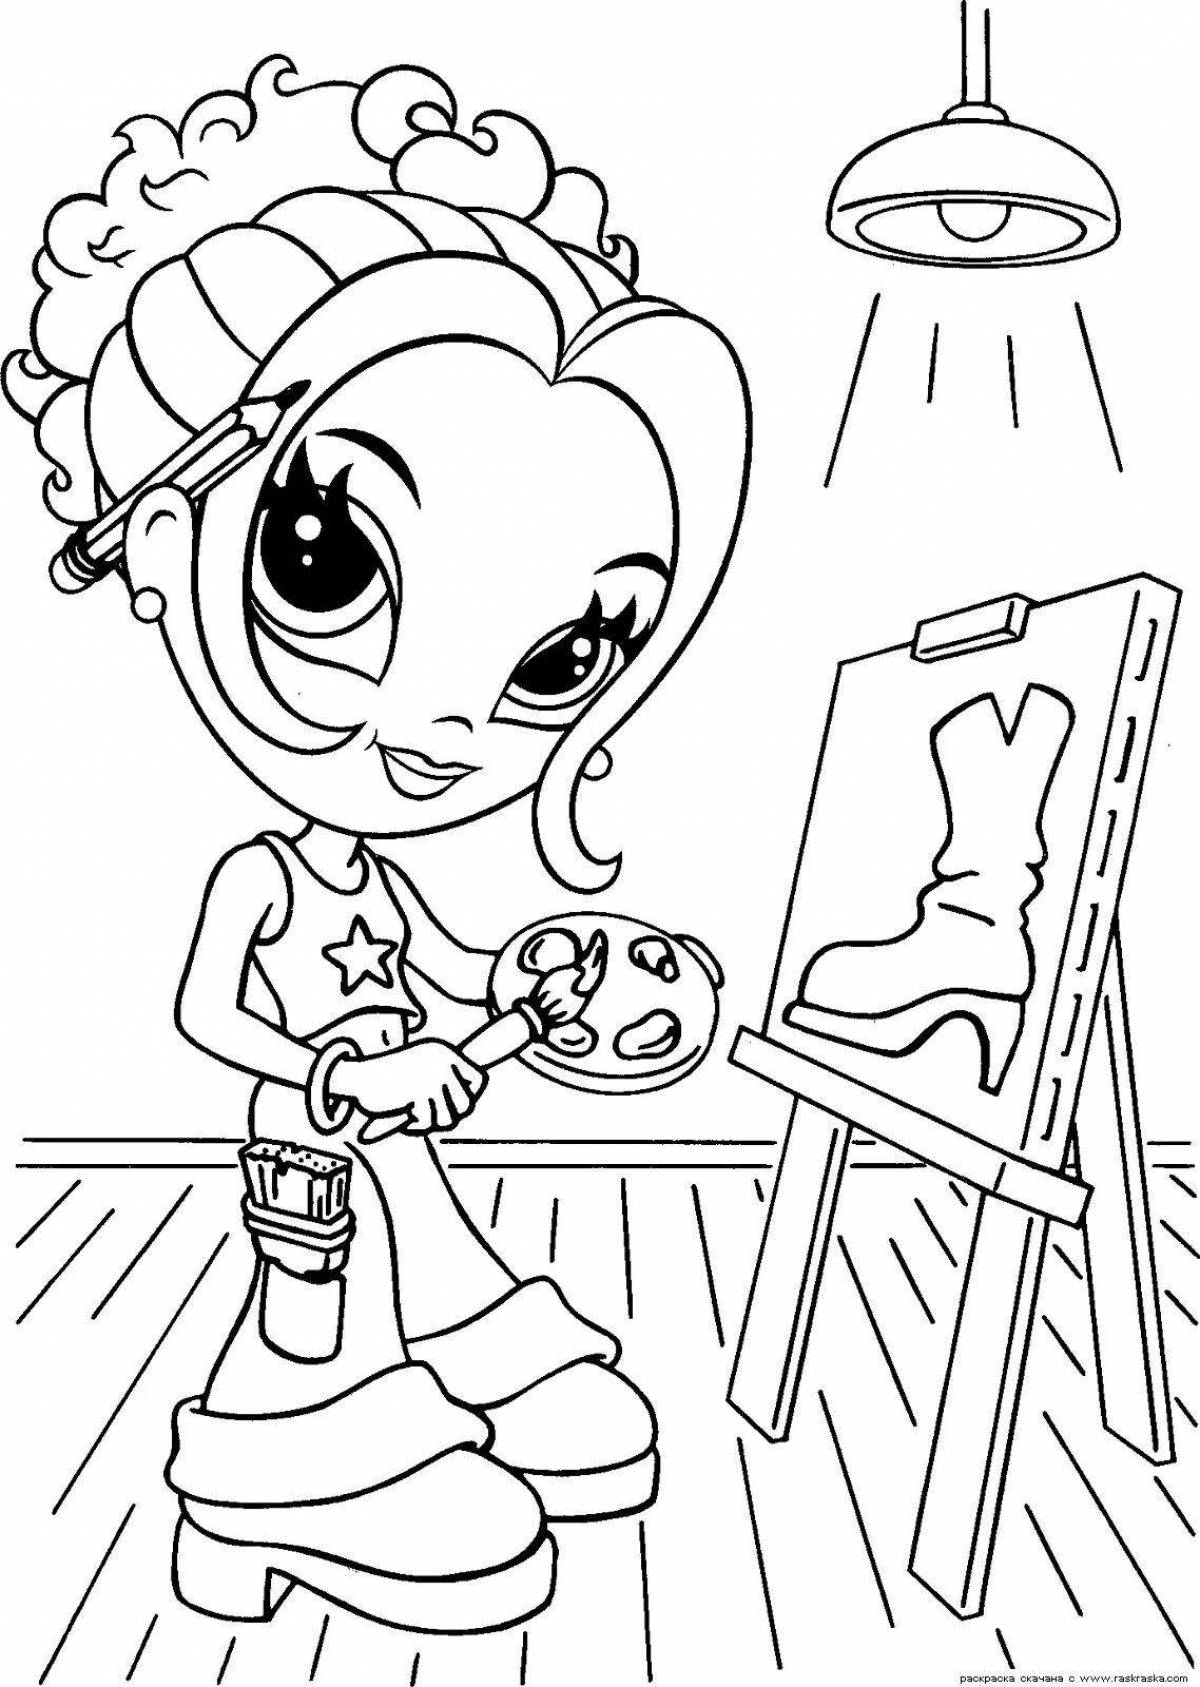 Fun coloring for girls 5-7 years old